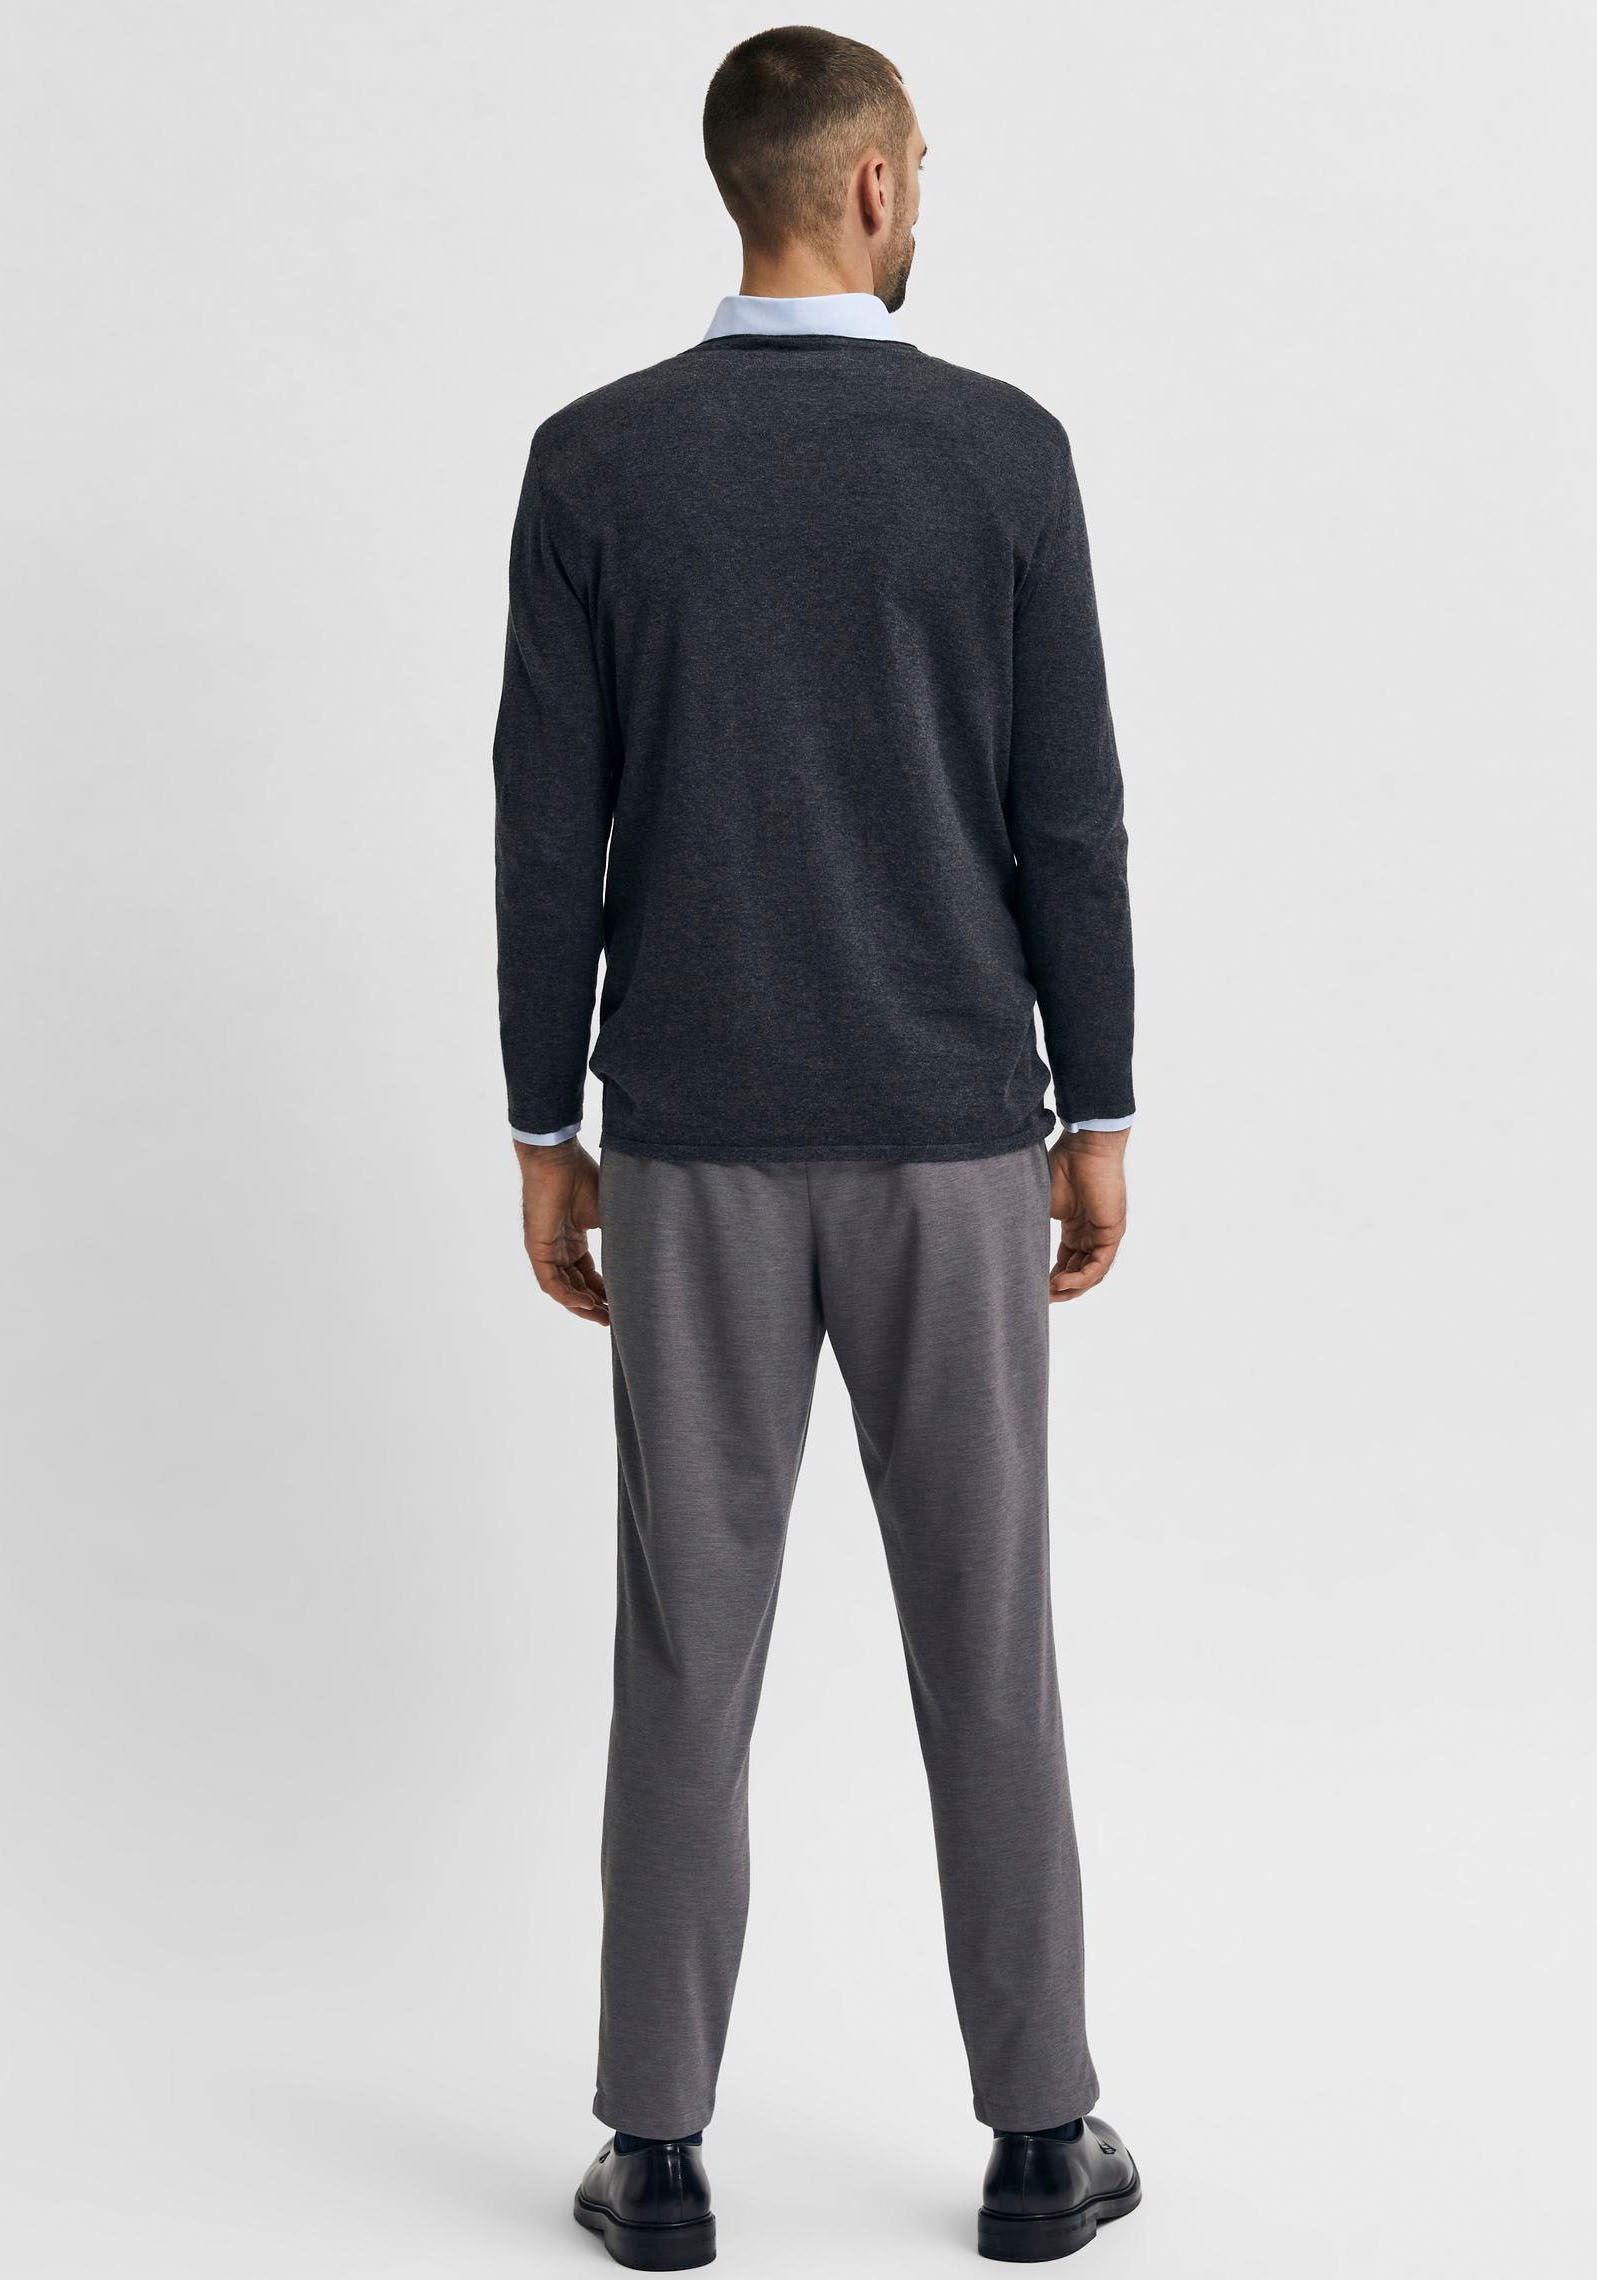 »ROME bei HOMME shoppen SELECTED Rundhalspullover online KNIT« OTTO